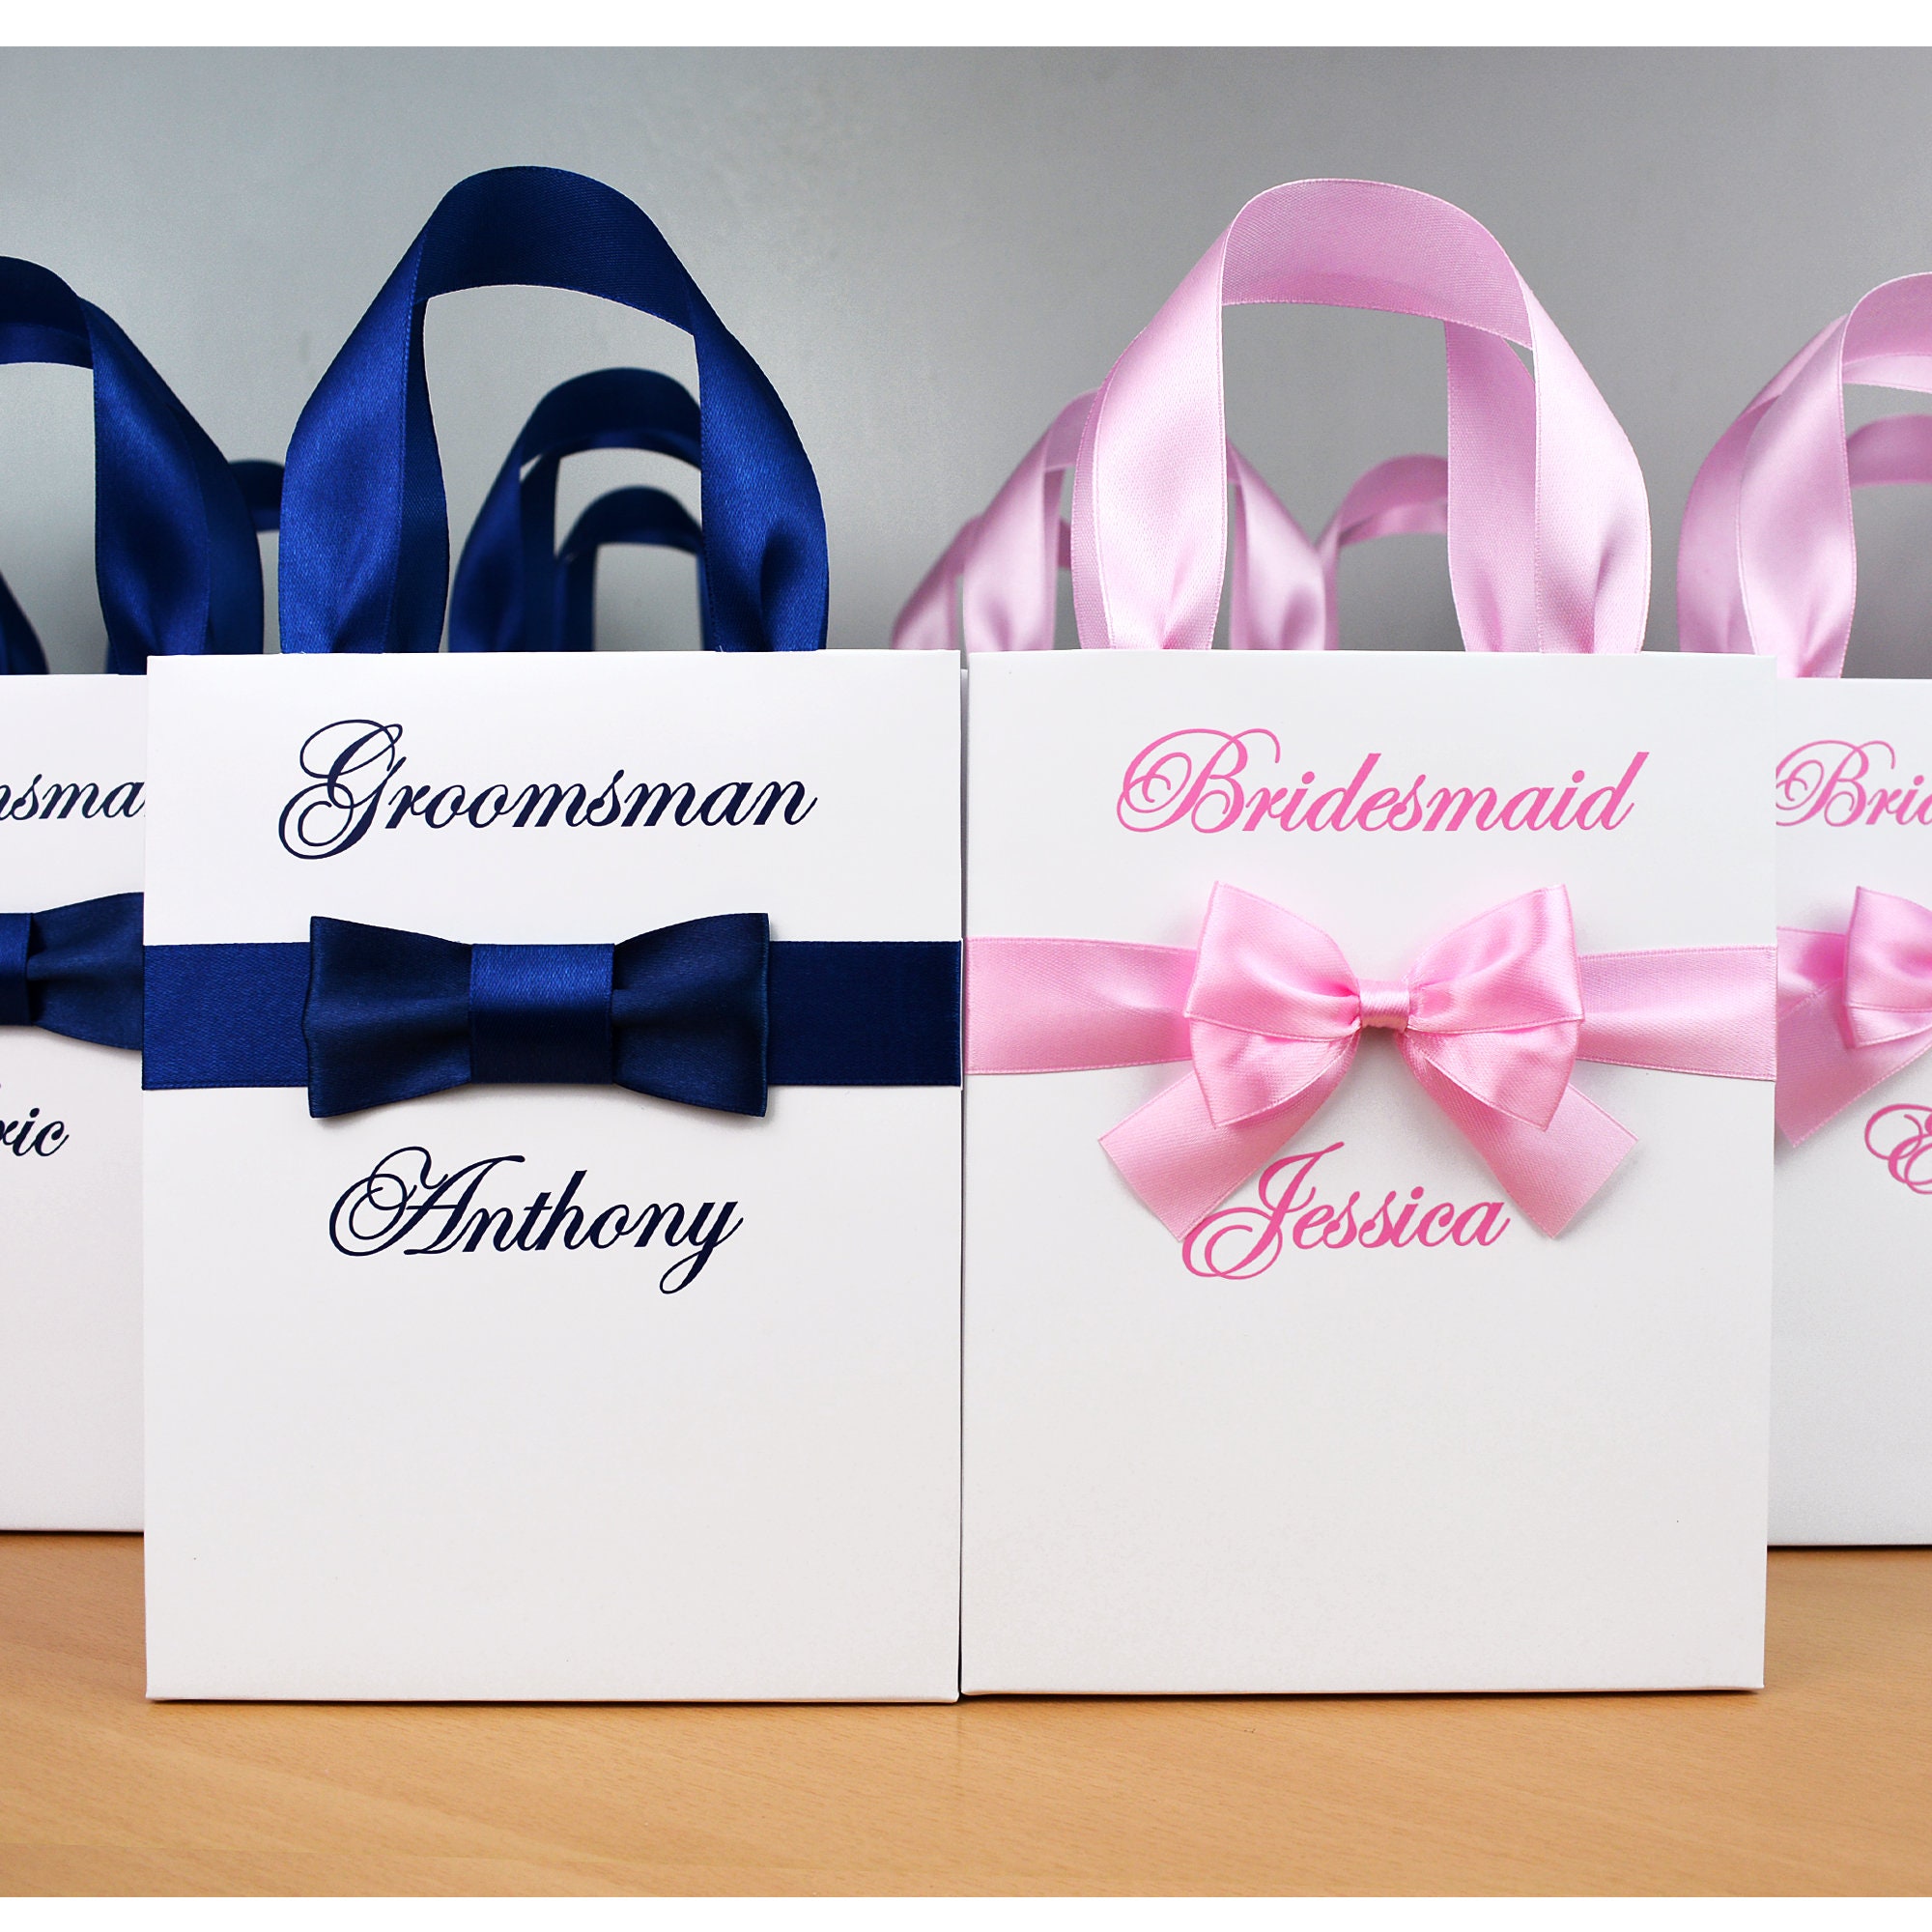 Personalized Bridesmaid and Groomsman Gift Bags Elegant Bags | Etsy